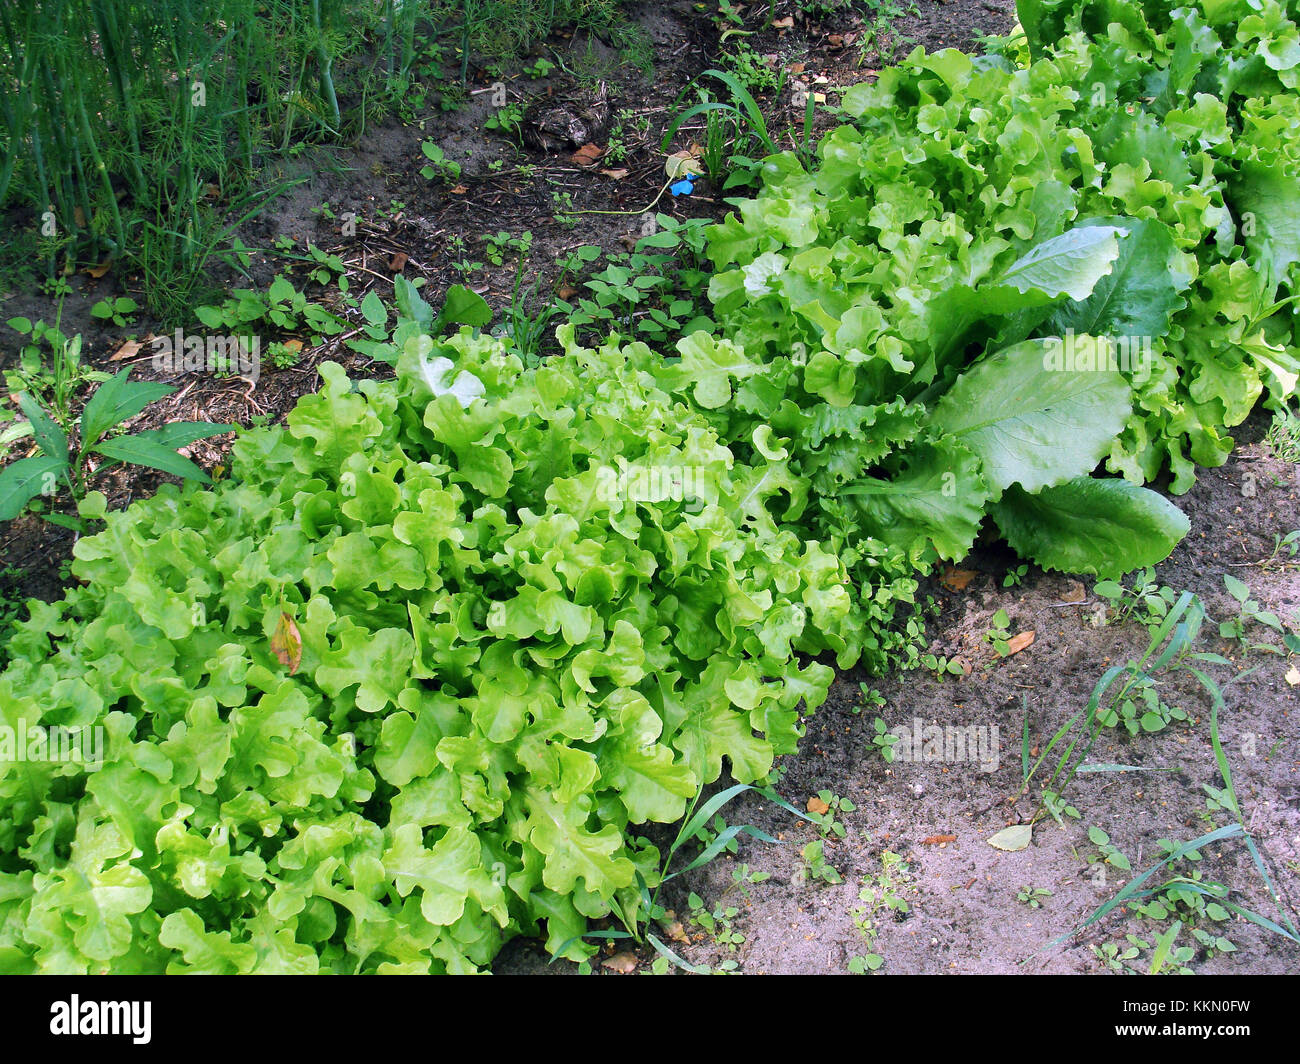 Furrows of dill and lettuce growing in vegetable garden concept of organic biological farming Stock Photo